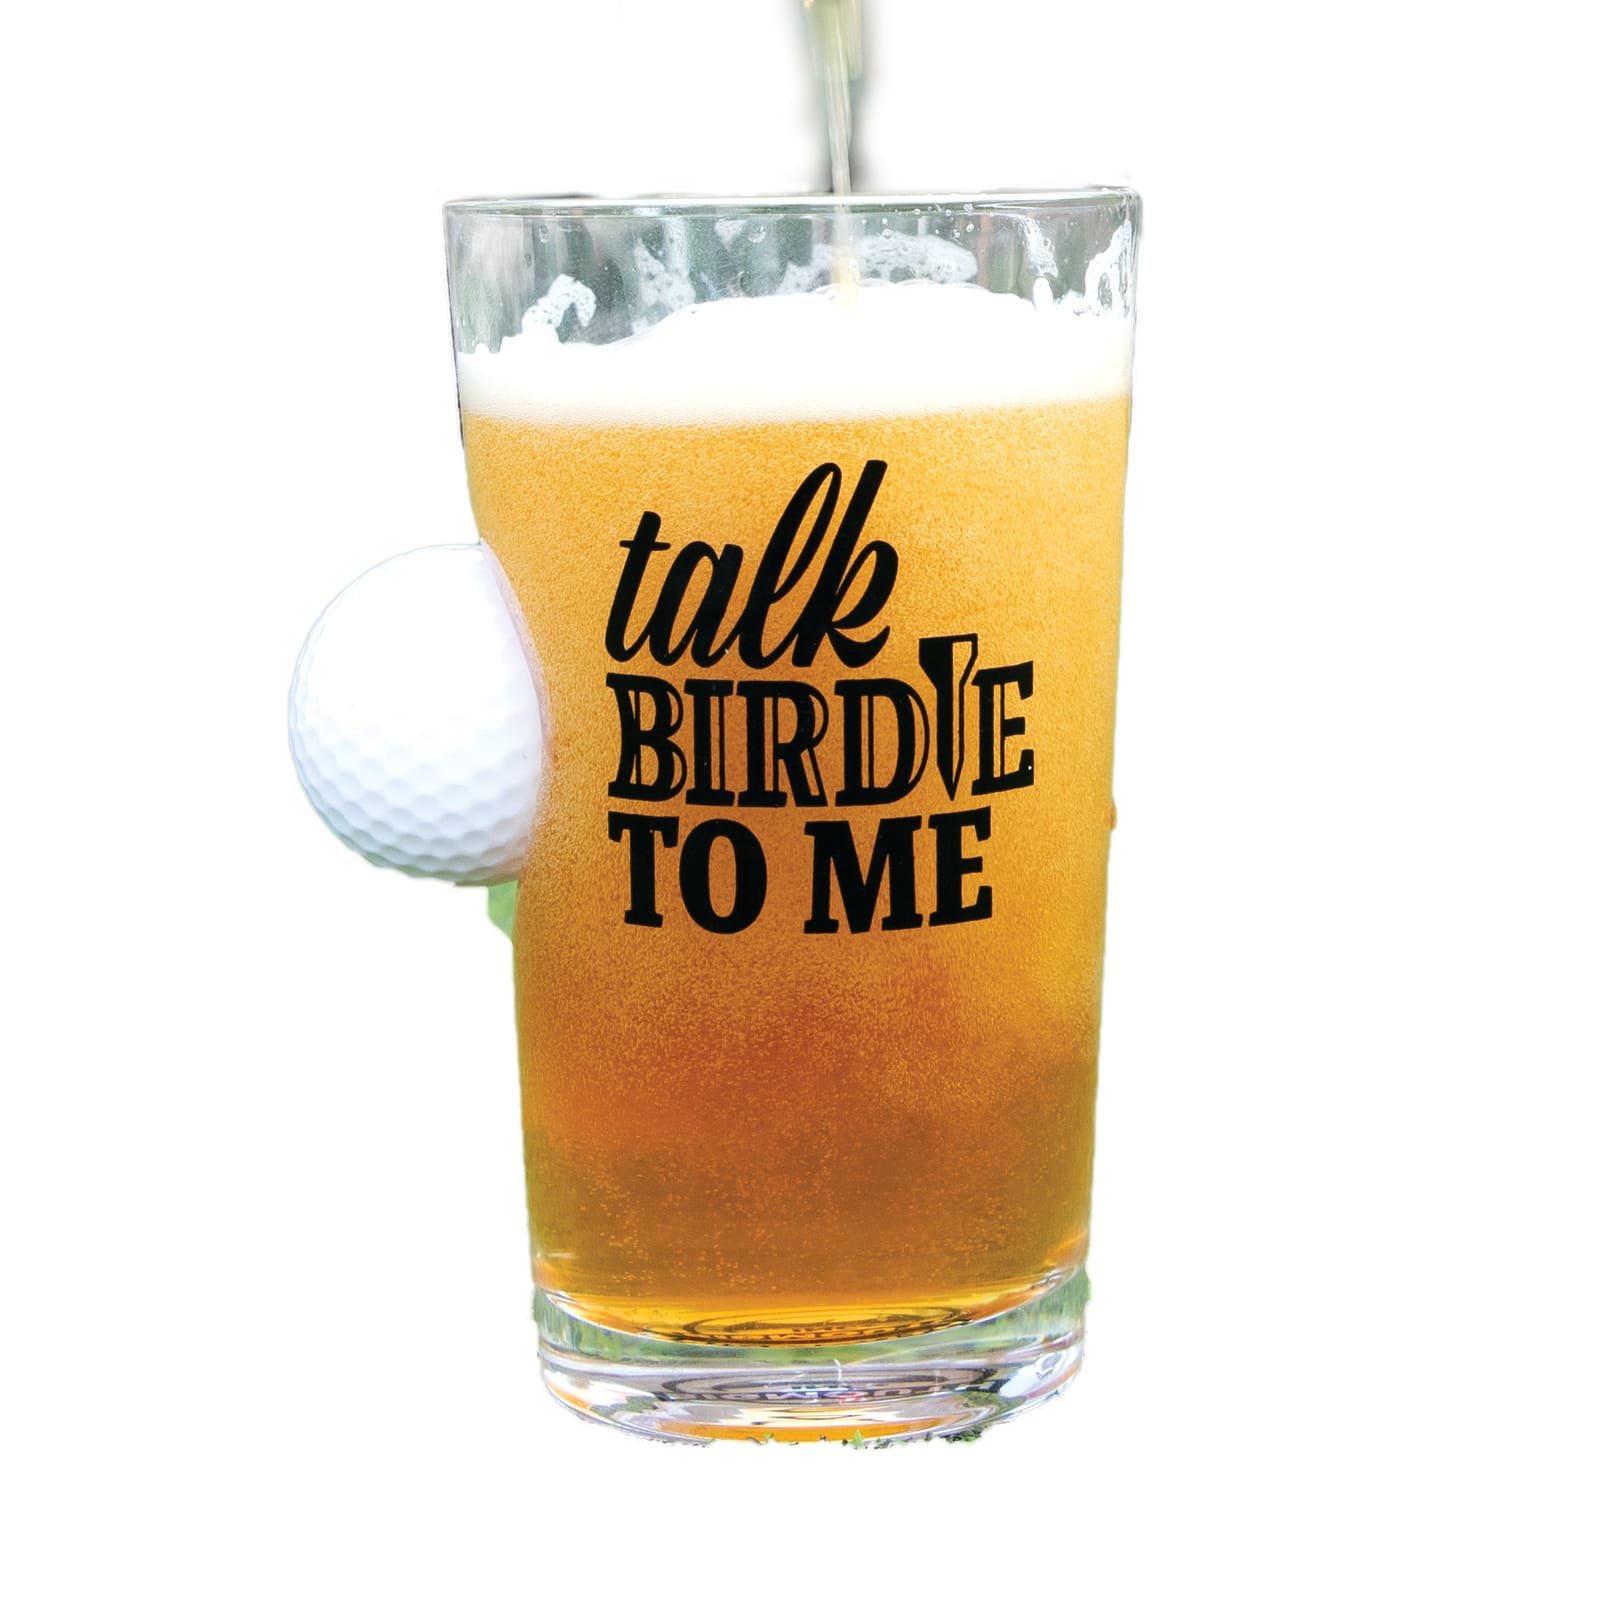 BigMouth Hole in One Beer Glass